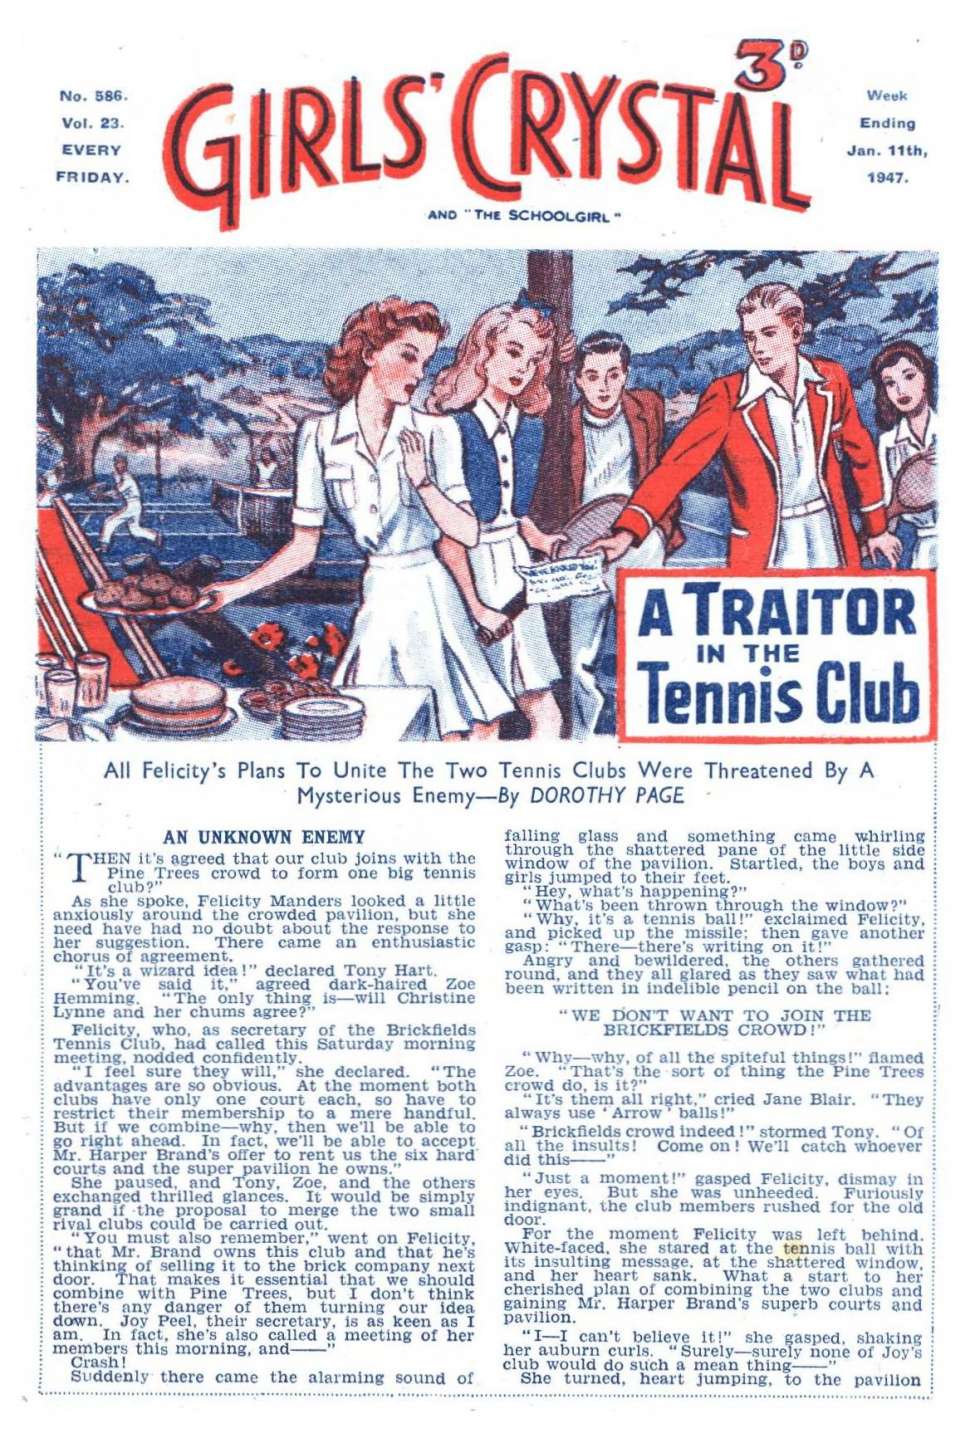 Comic Book Cover For Girls' Crystal 586 - A Traitor in the Tennis Club